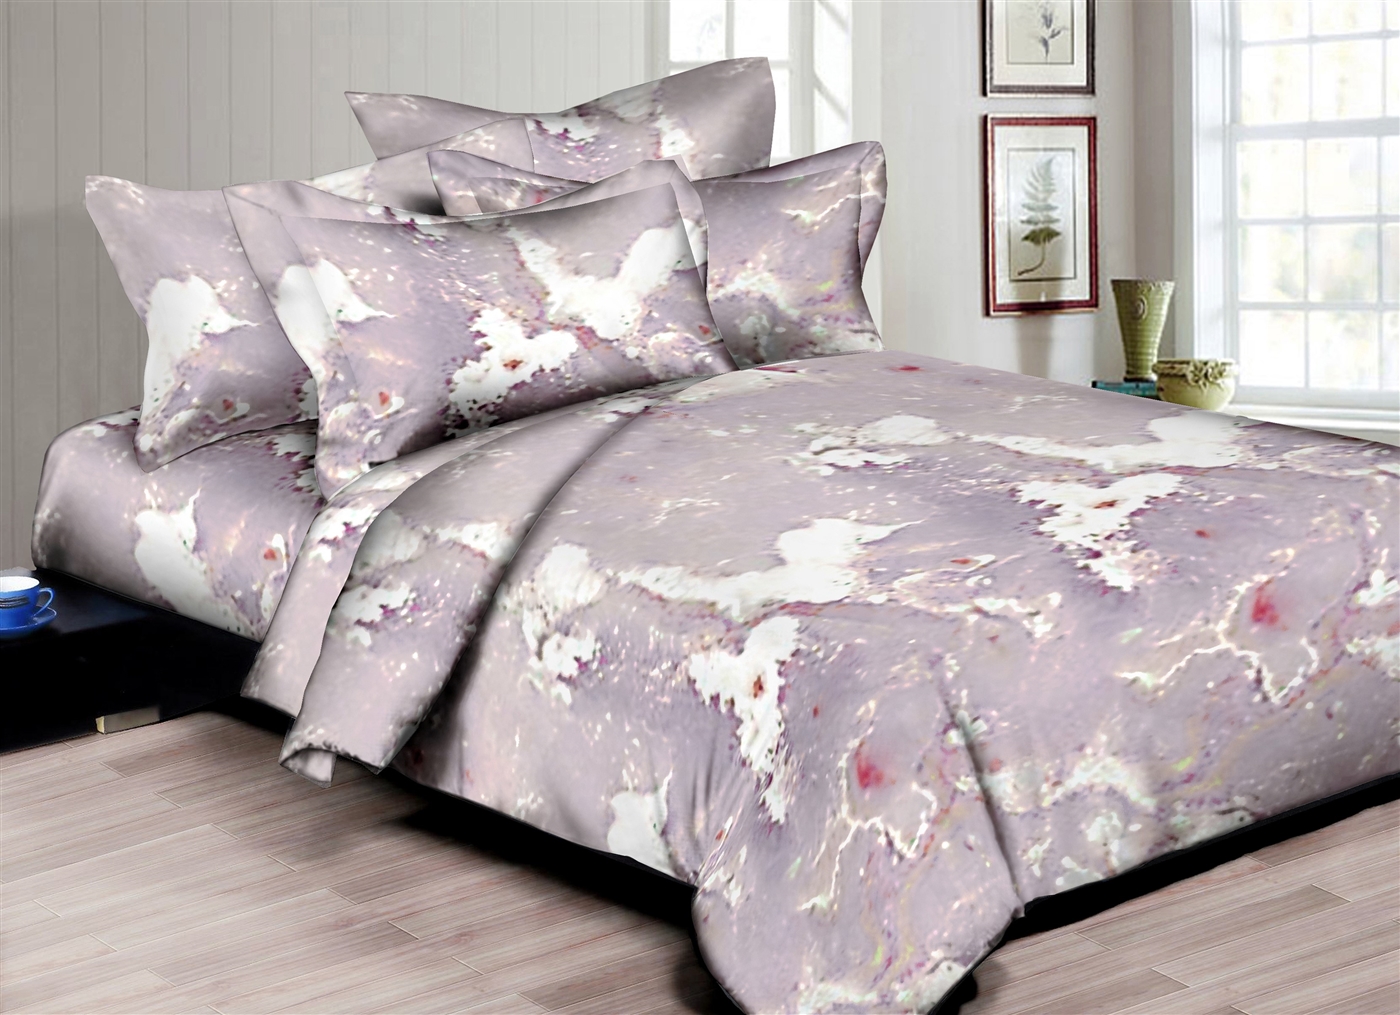 Better Bed Collection: Pretty Lavender 8PC Bedding Sets - 300 Thread Count